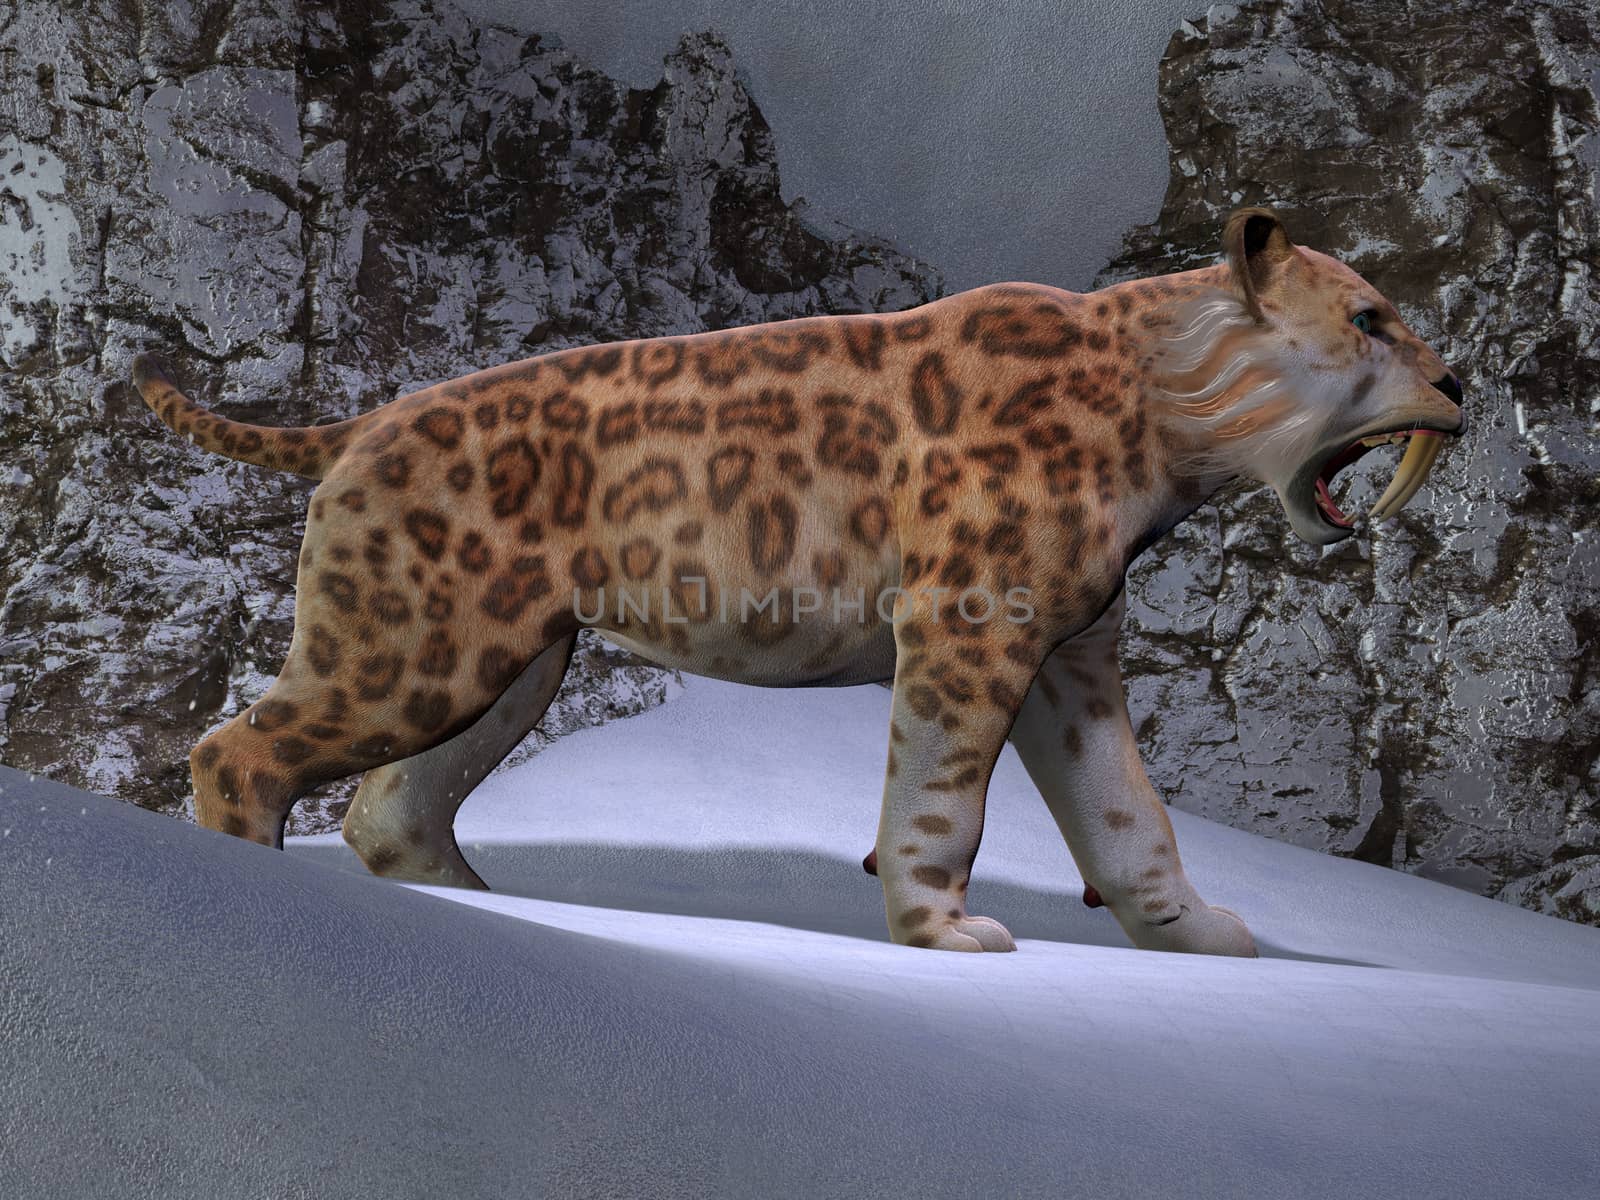 A Saber-toothed Tiger makes his way through the snow as he looks for mountain prey in the Eocene Era.